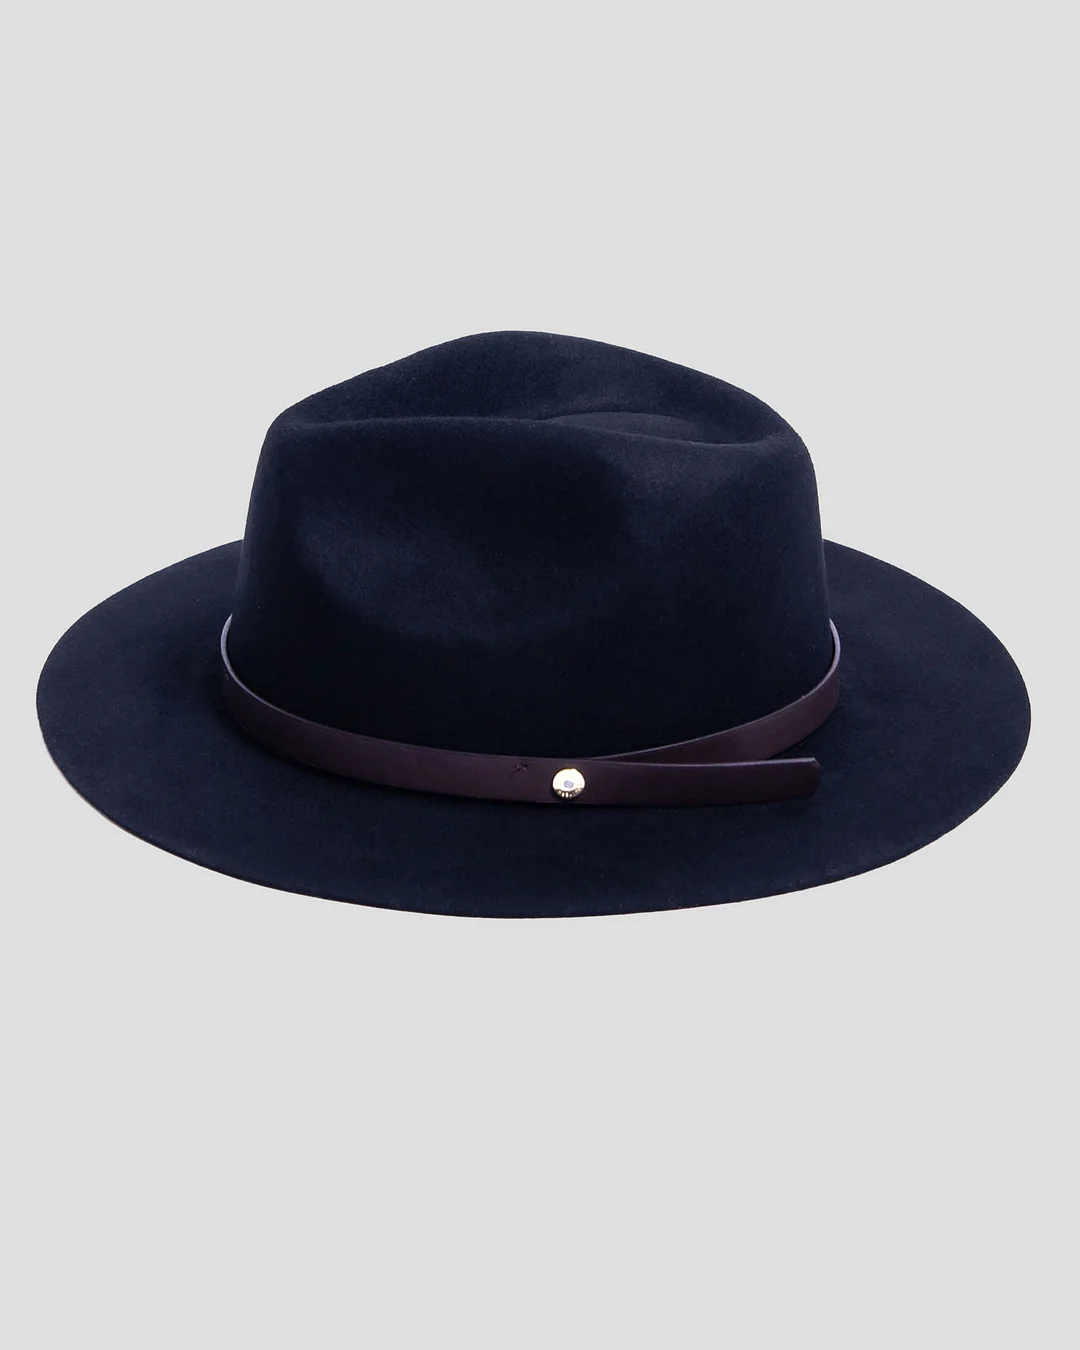 Miller Ranch Geoffery Fedora – Black[Fast shipping and box packing]